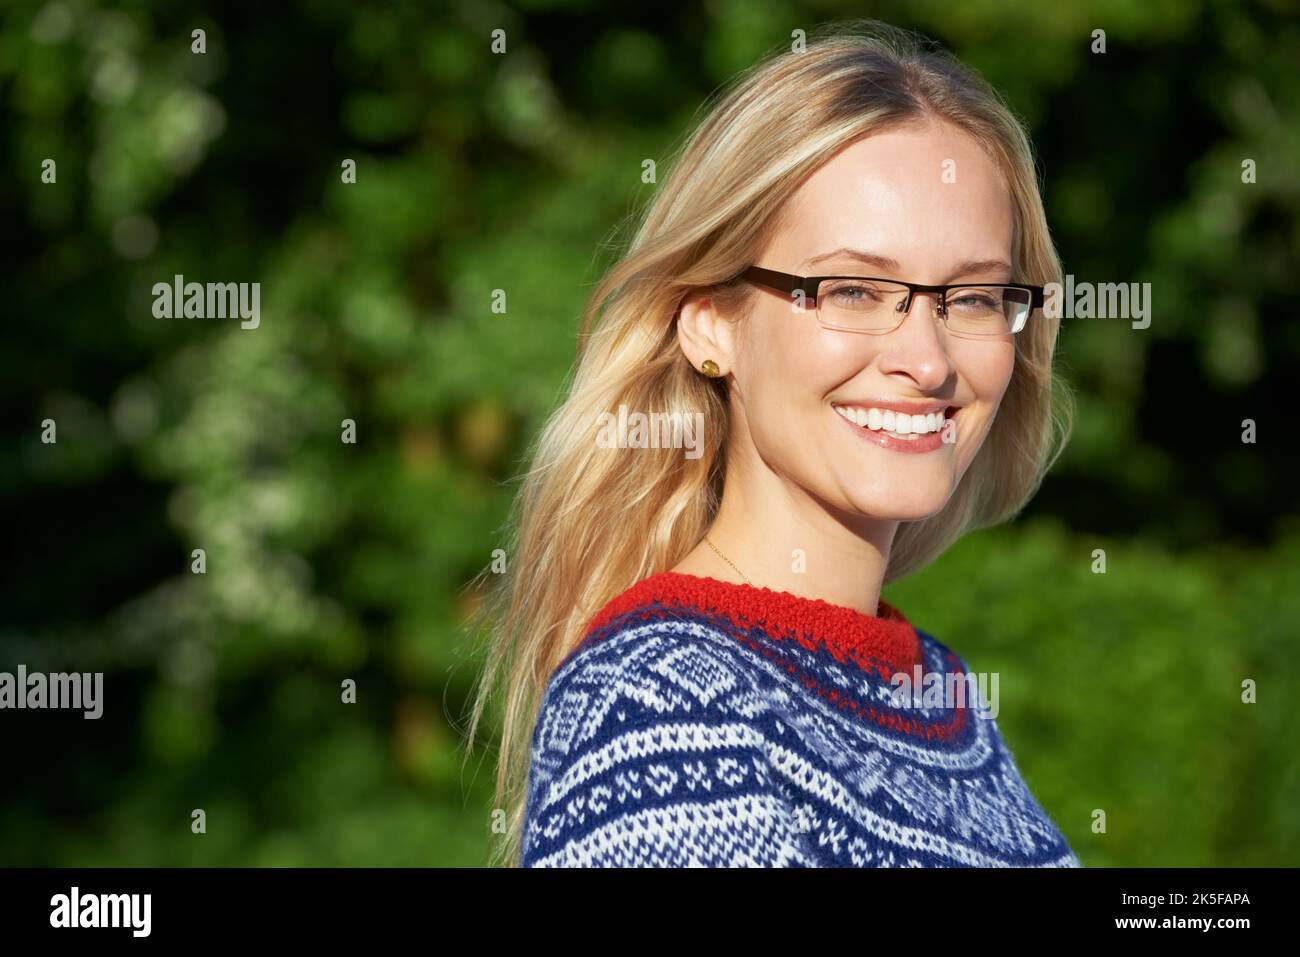 She loves winter time. an attractive young woman enjoying a day outside. Stock Photo